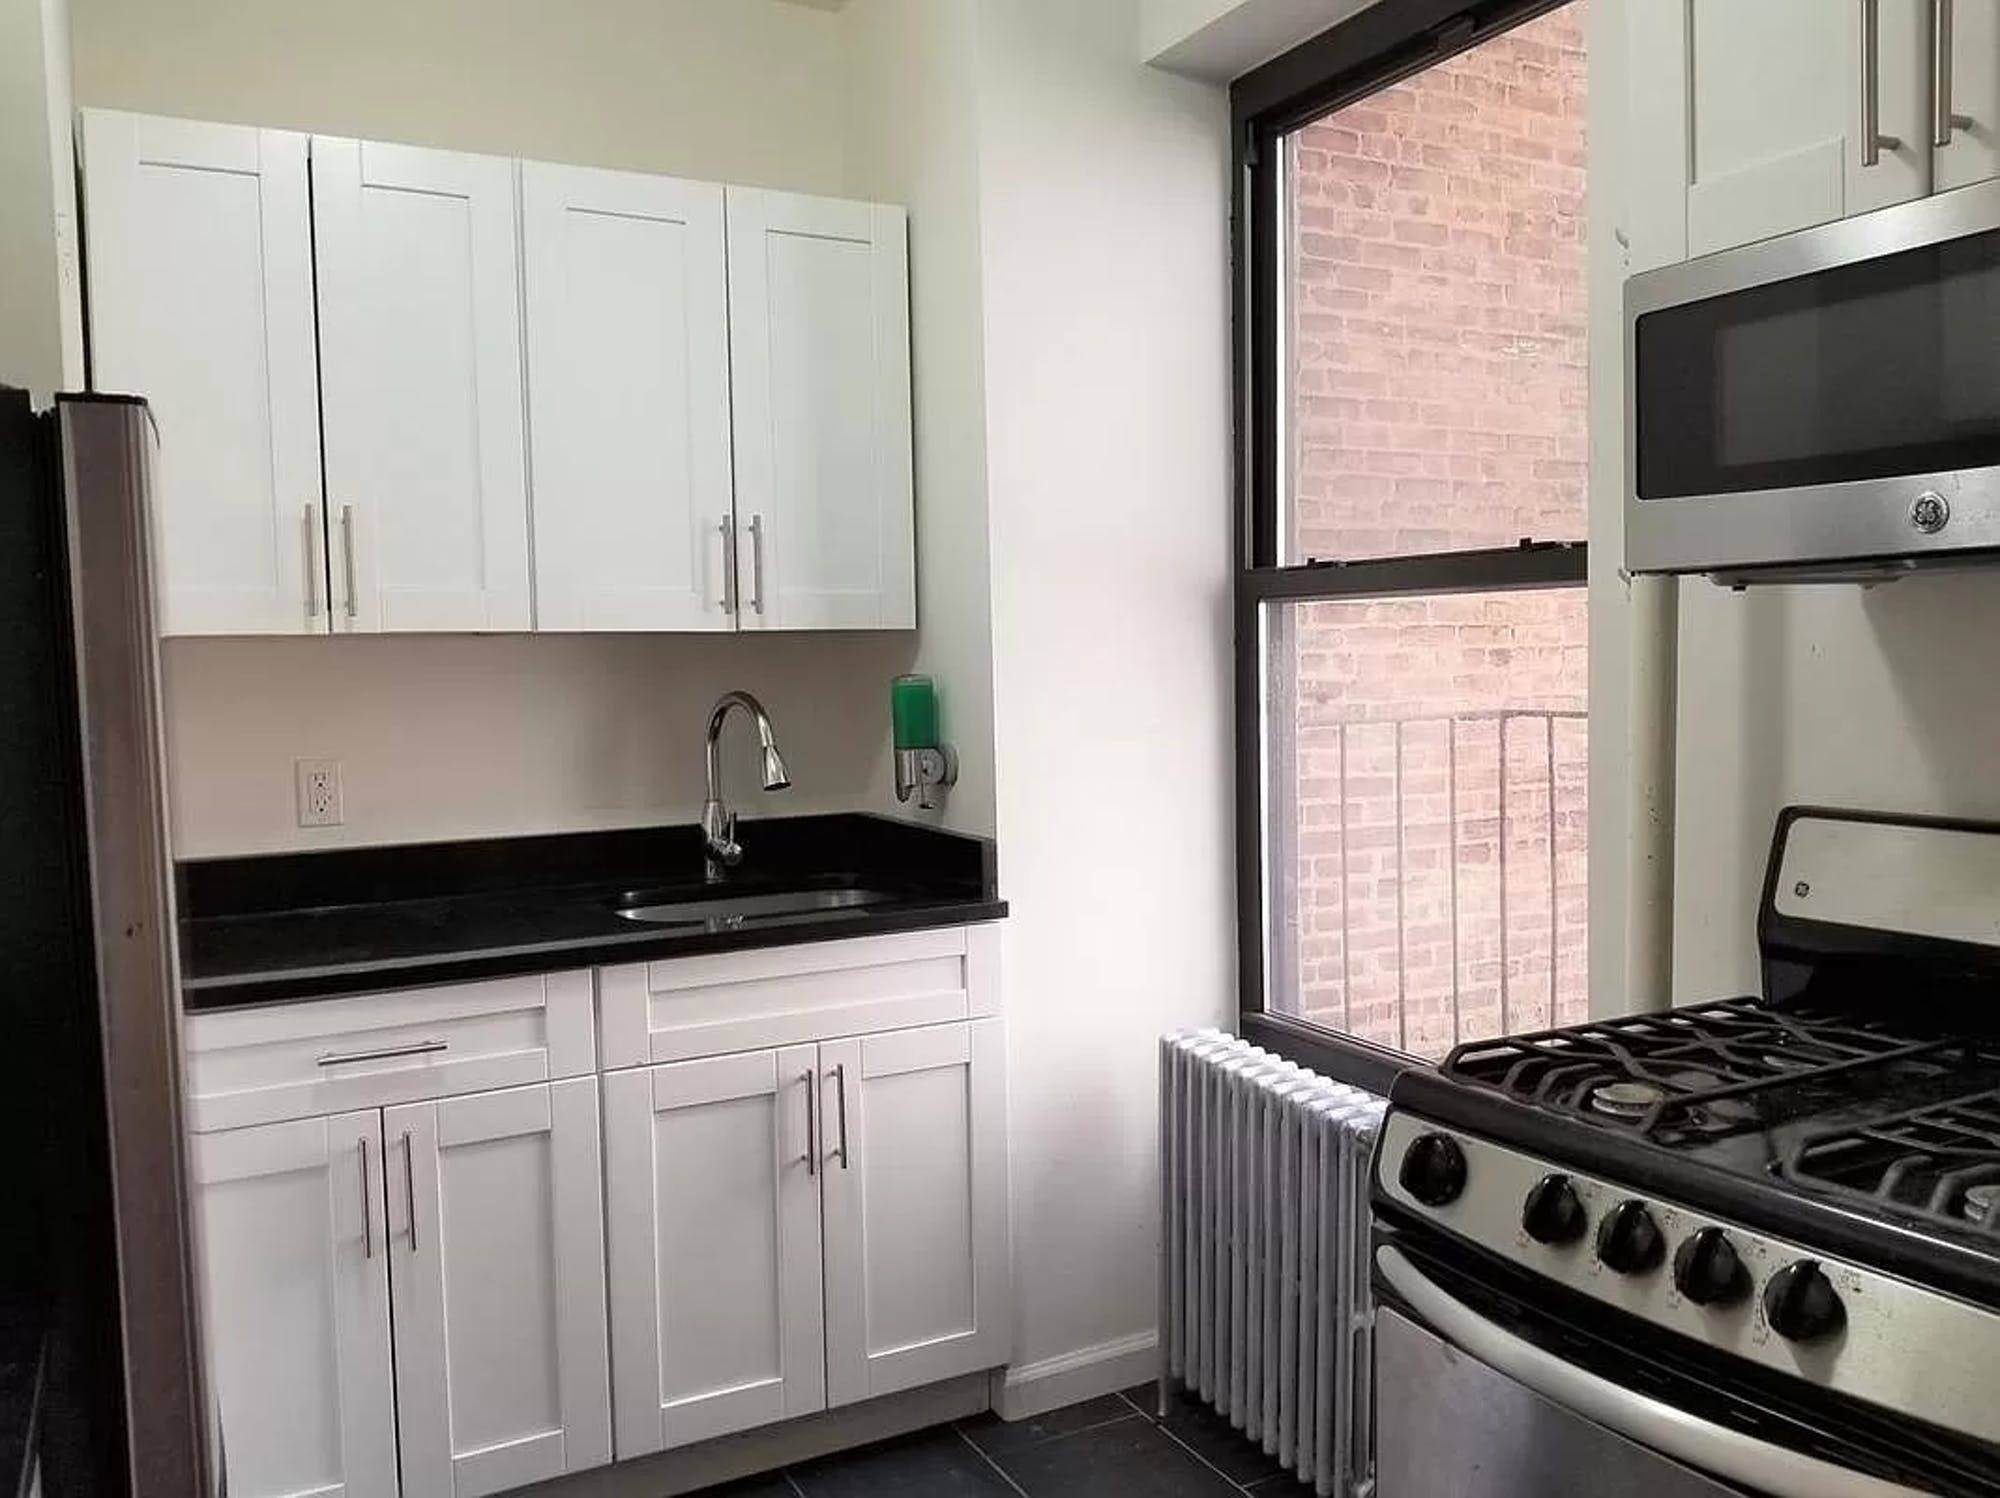 Newly Reduced ! ! ! ! No Fee 2 Months free Large 1 bedroom apartment located in prime Hudson Square, available NOW !